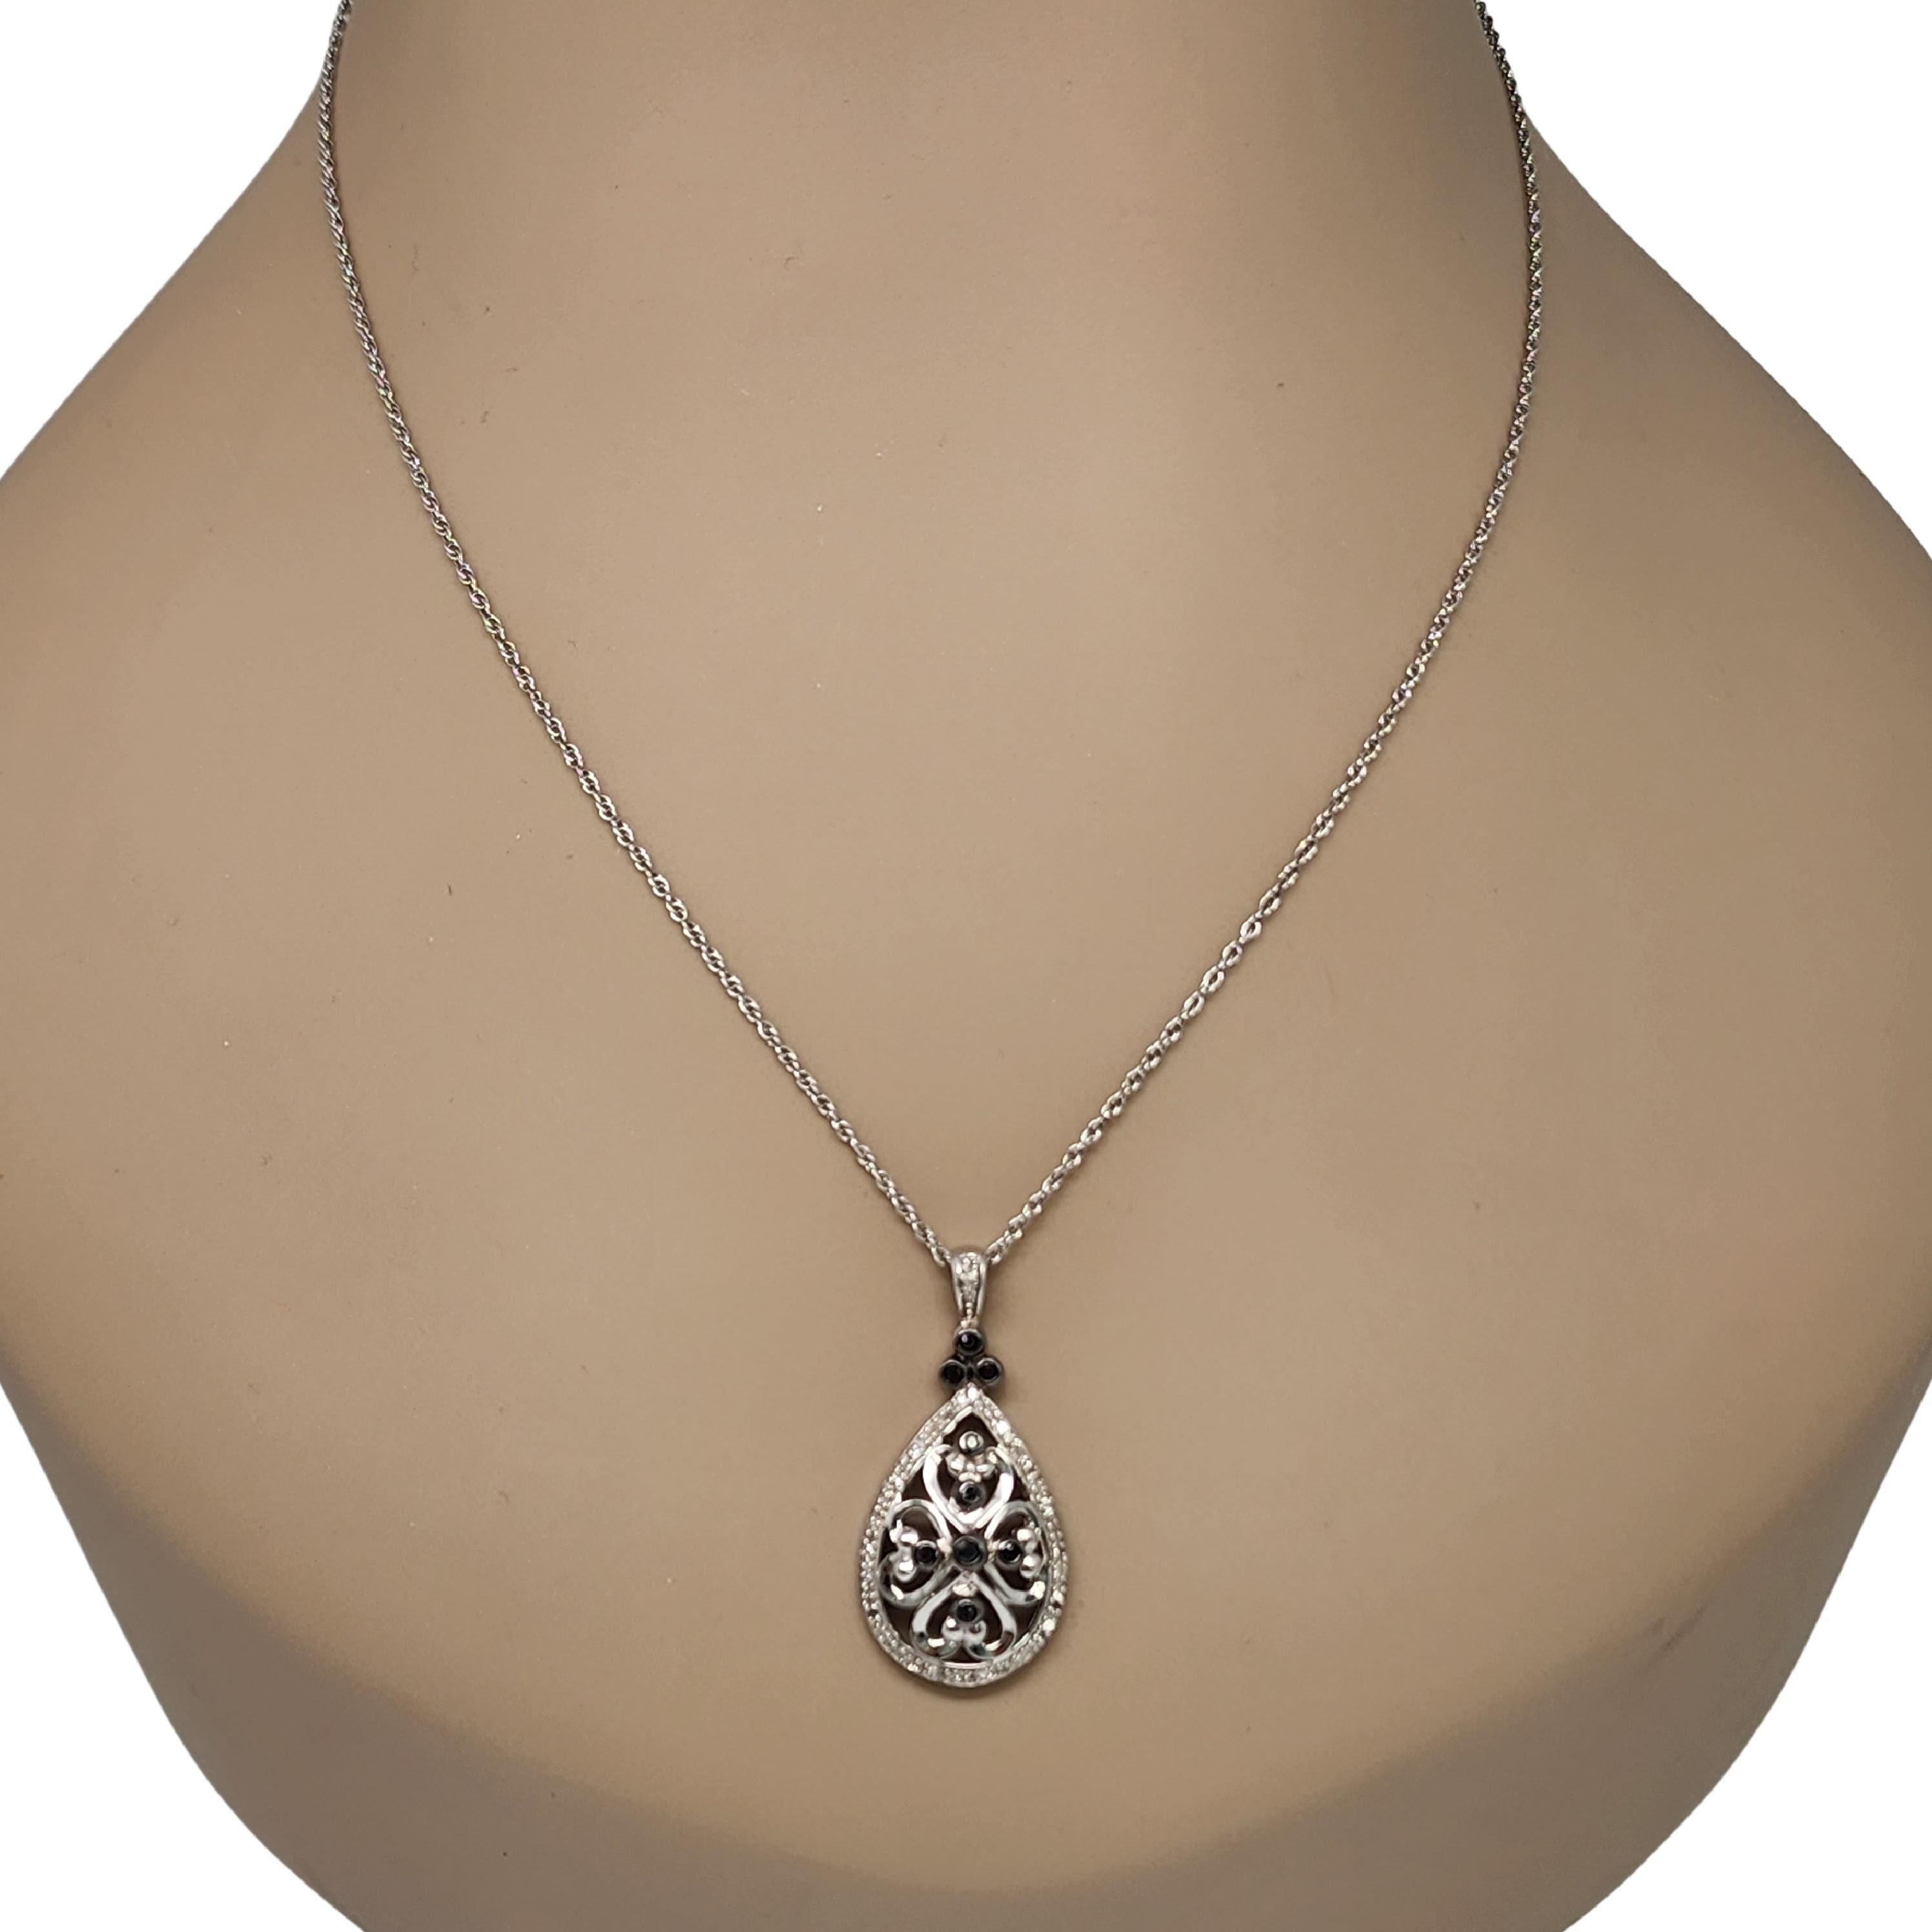 Kay Jewelers Sterling Silver Black and White Diamonds Pendant Necklace #17005 For Sale 3